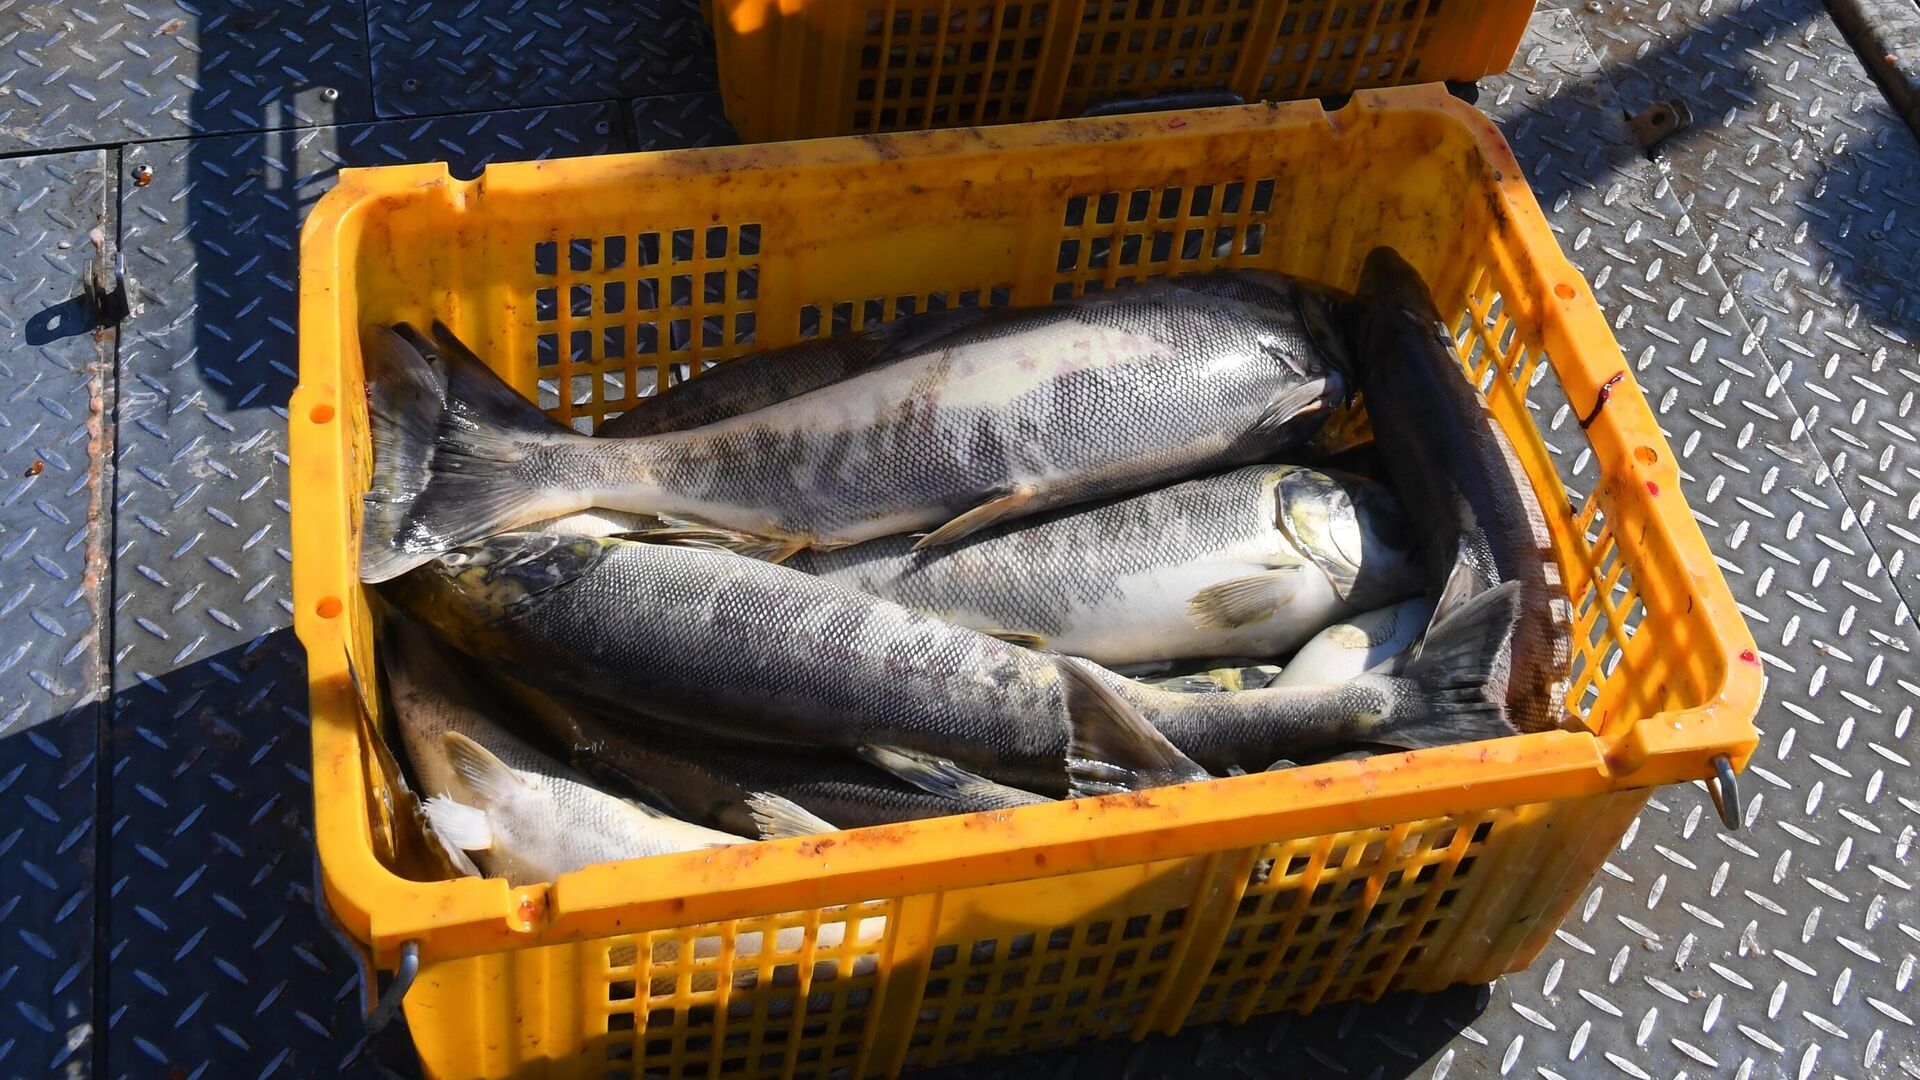 Russia has increased its fishing catch since the beginning of the year